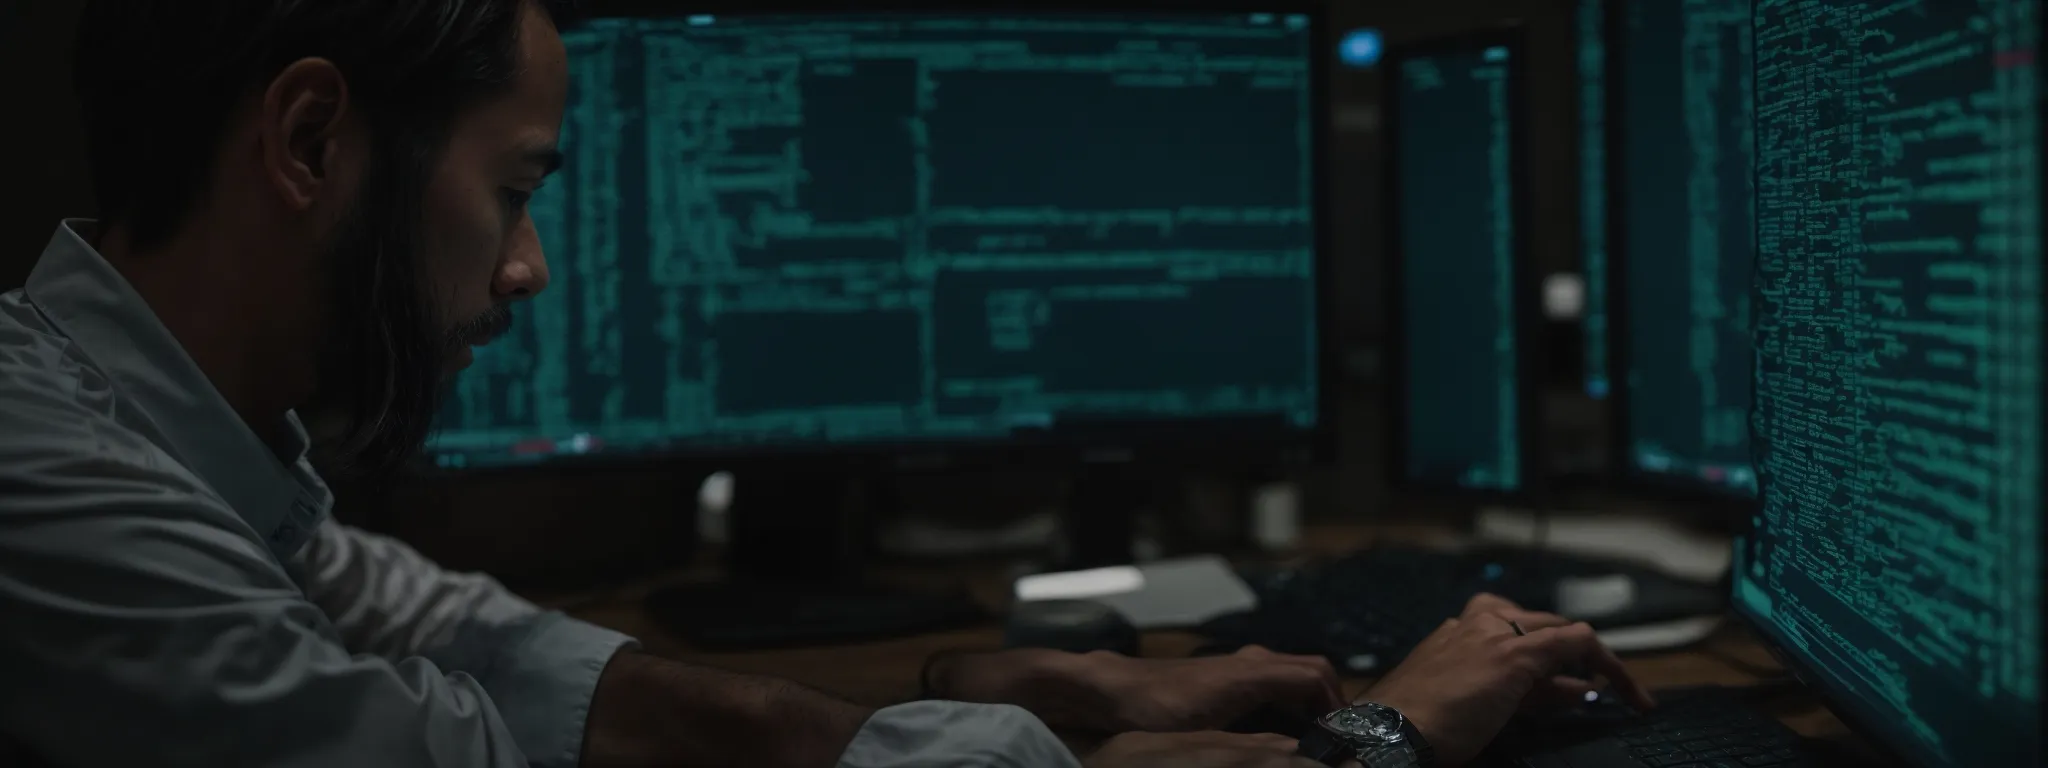 a web developer intently scrutinizes lines of code on a computer screen, pondering the best redirect technique for seo.